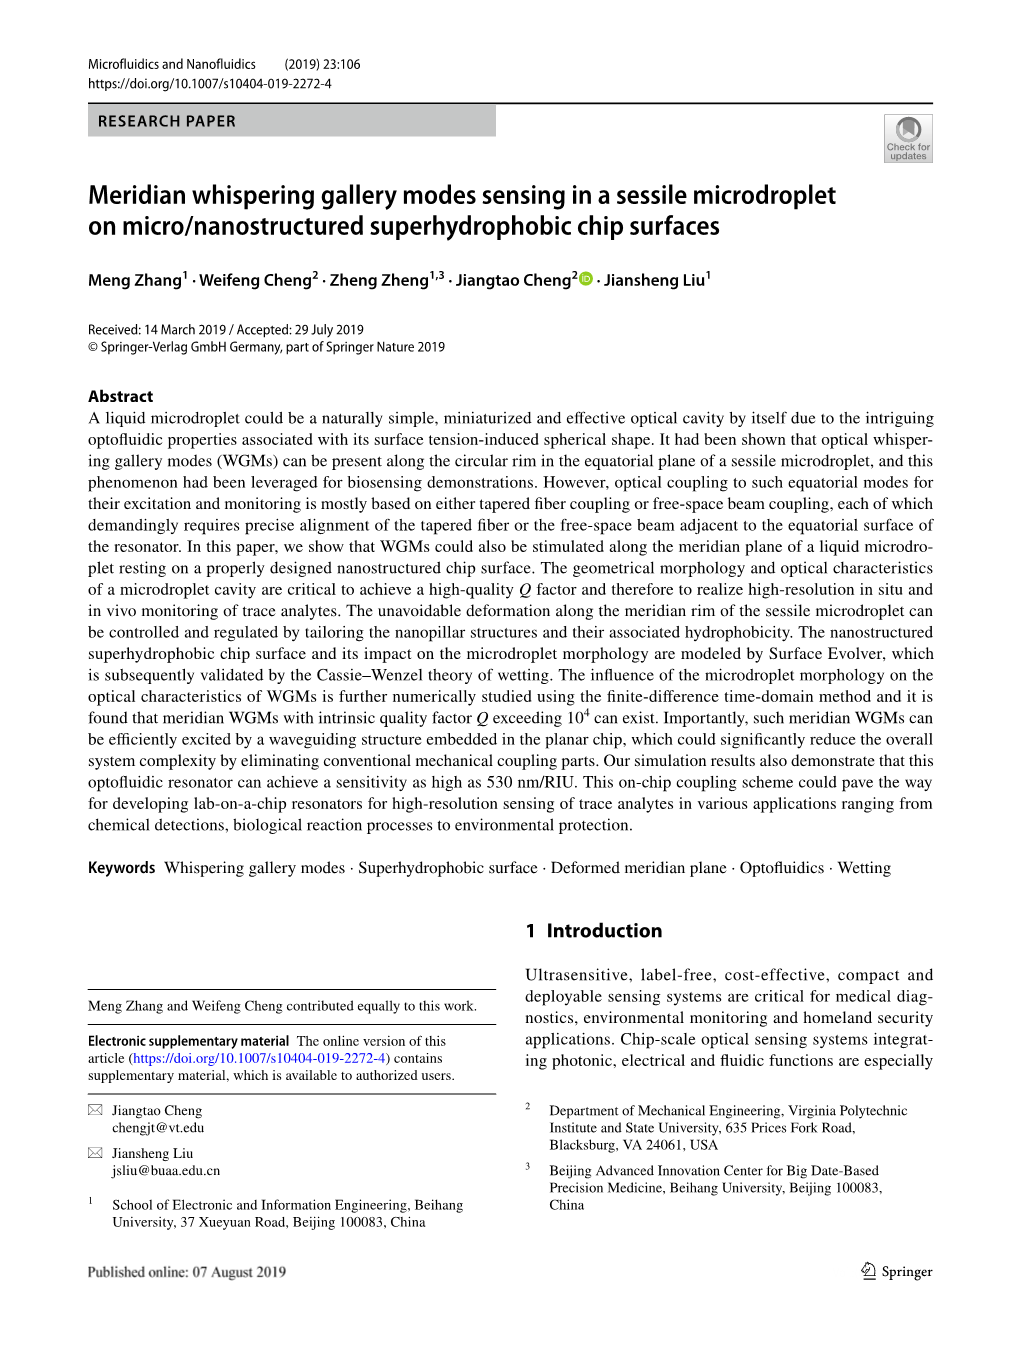 Meridian Whispering Gallery Modes Sensing in a Sessile Microdroplet on Micro/Nanostructured Superhydrophobic Chip Surfaces